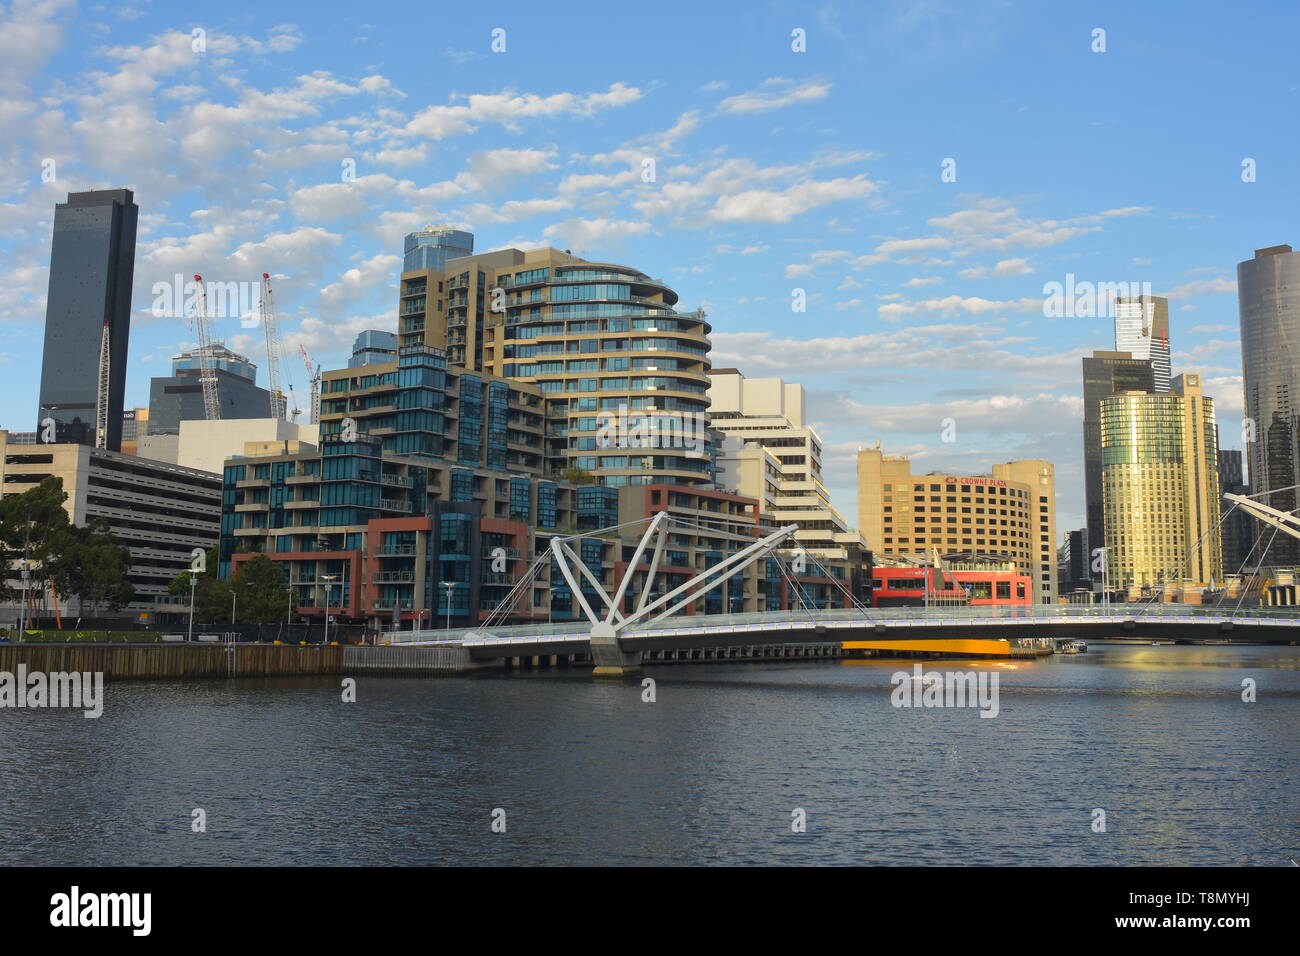 Distant view of Seafarers Bridge over Yarra River with modern buildings of Northbank in background. Stock Photo